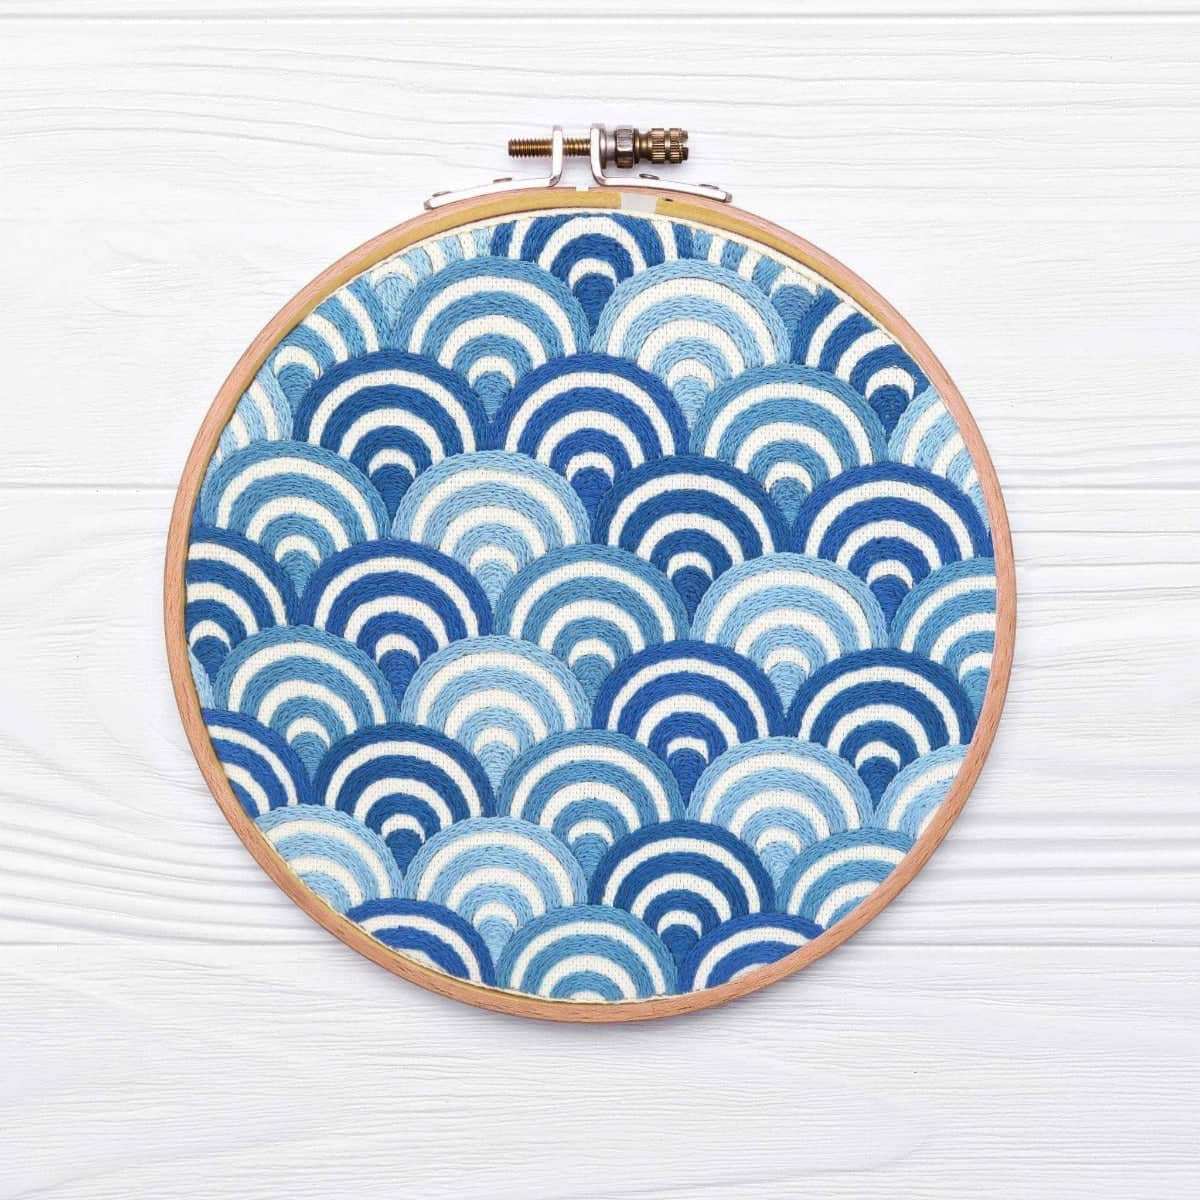 Waves Hand Embroidery Pattern , PDF Download , StitchDoodles , beginner embroidery, embroidery hoop kit, embroidery kit for adults, embroidery kit for beginners, embroidery kits for adults, embroidery kits for beginers, hand embroidery, modern embroidery kits, PDF pattern , StitchDoodles , shop.stitchdoodles.com